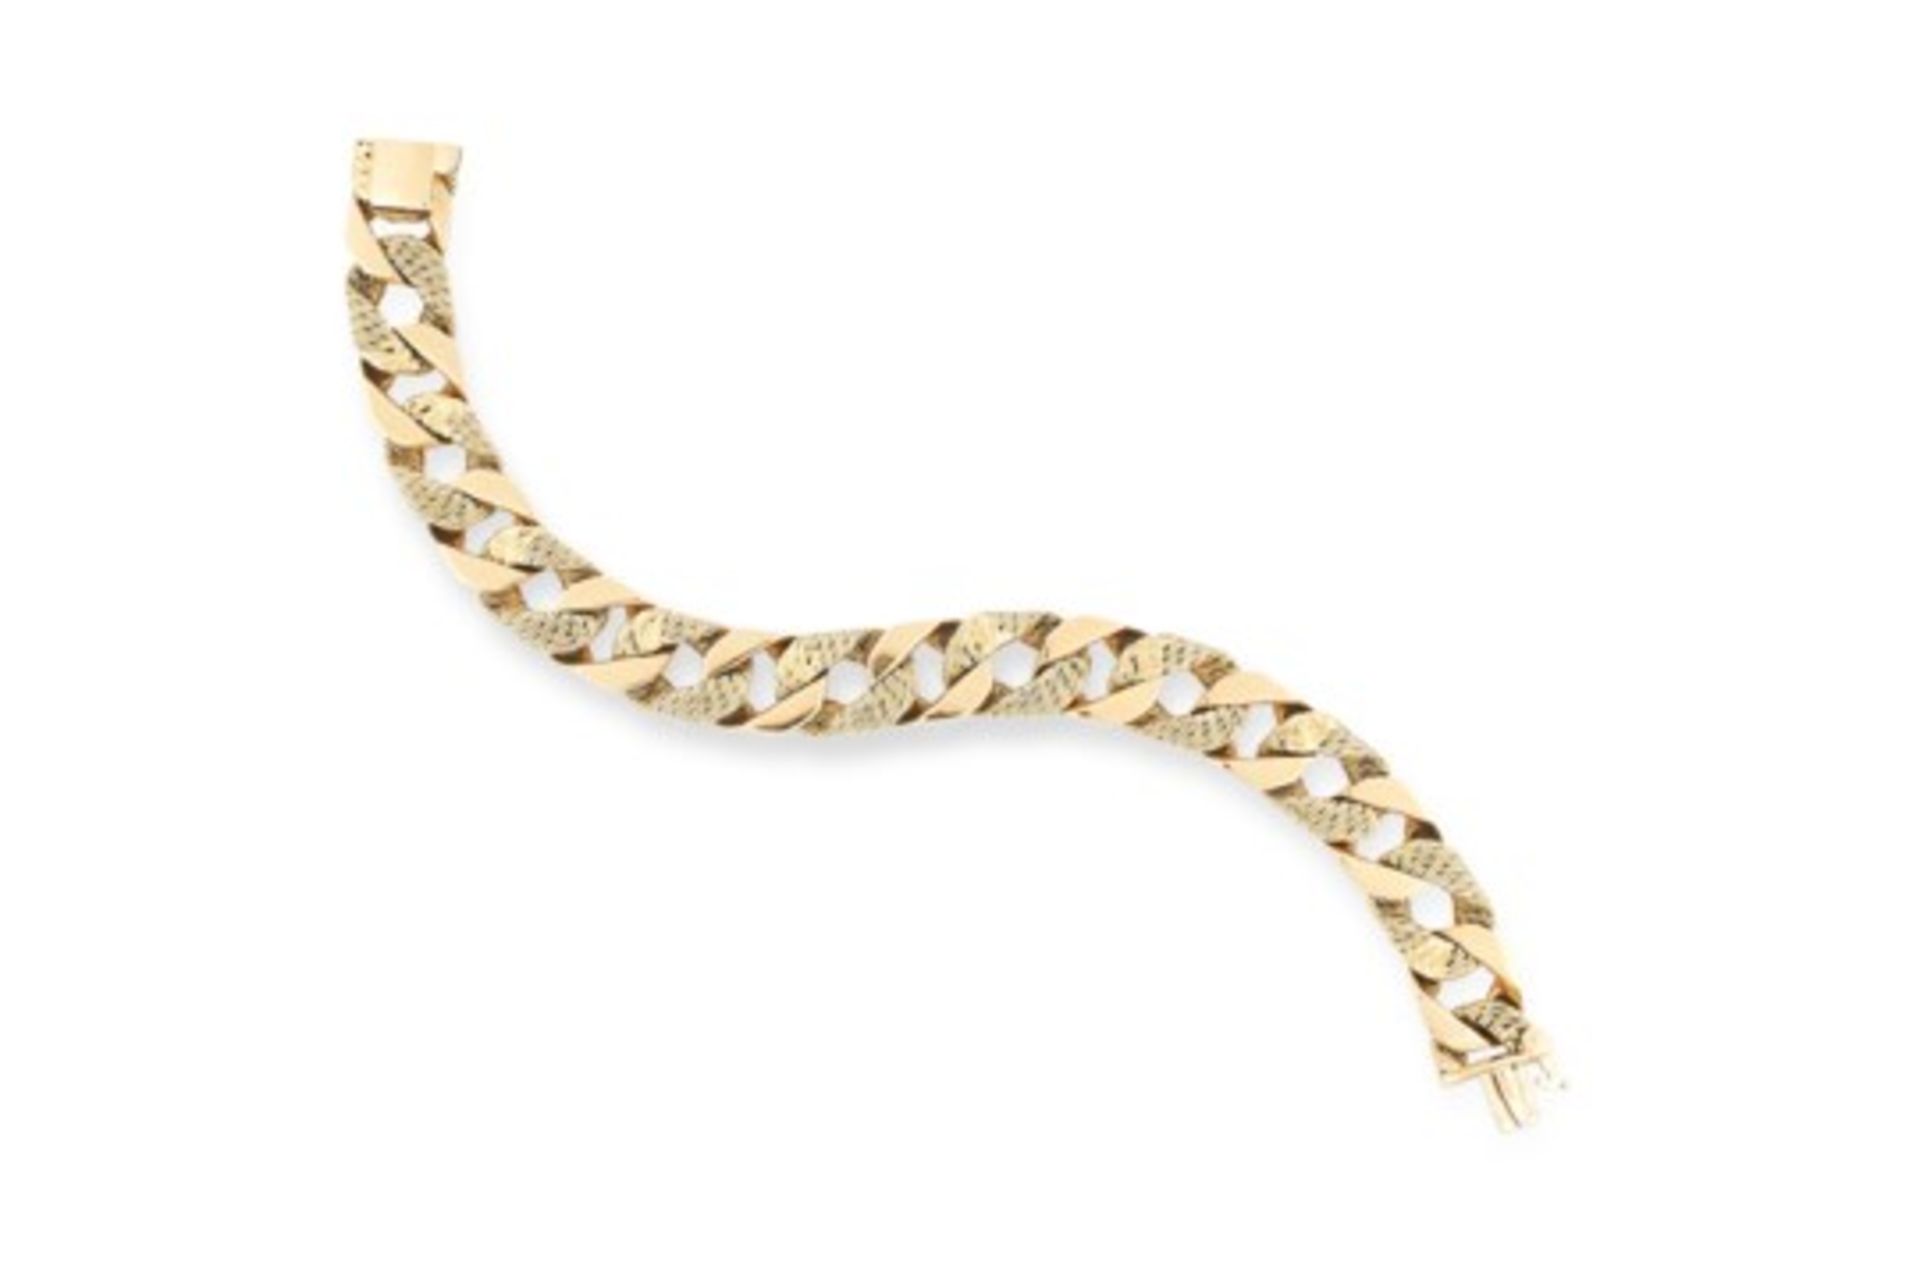 A VINTAGE FANCY LINK BRACELET, GEORGES LENFANT CIRCA 1970 in 18ct yellow gold, comprising of